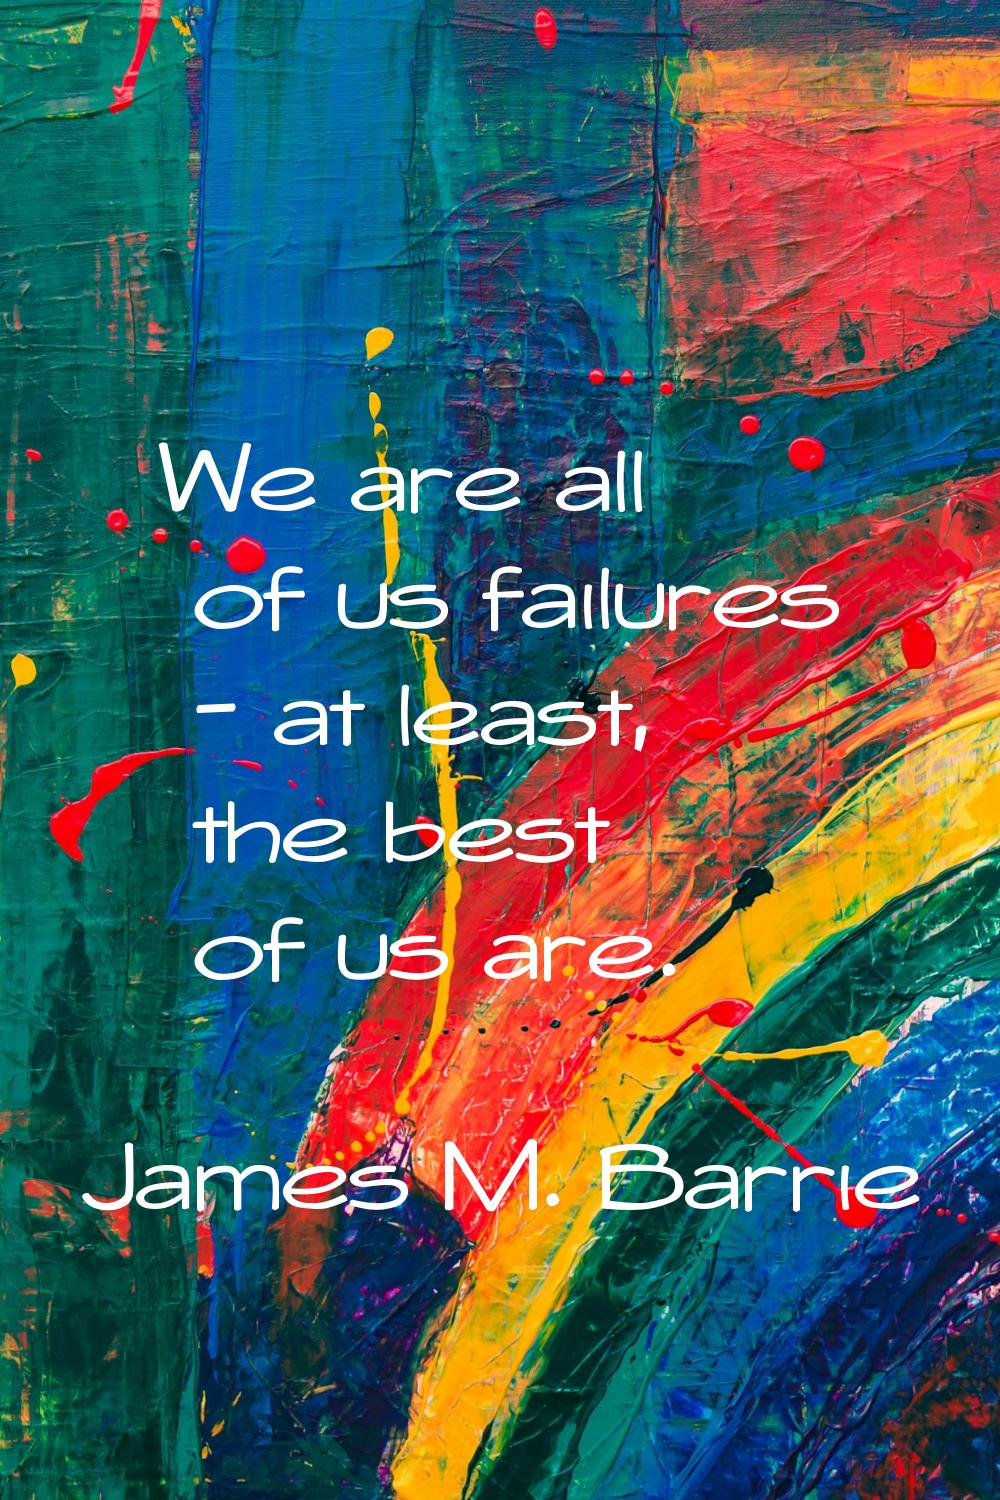 We are all of us failures - at least, the best of us are.